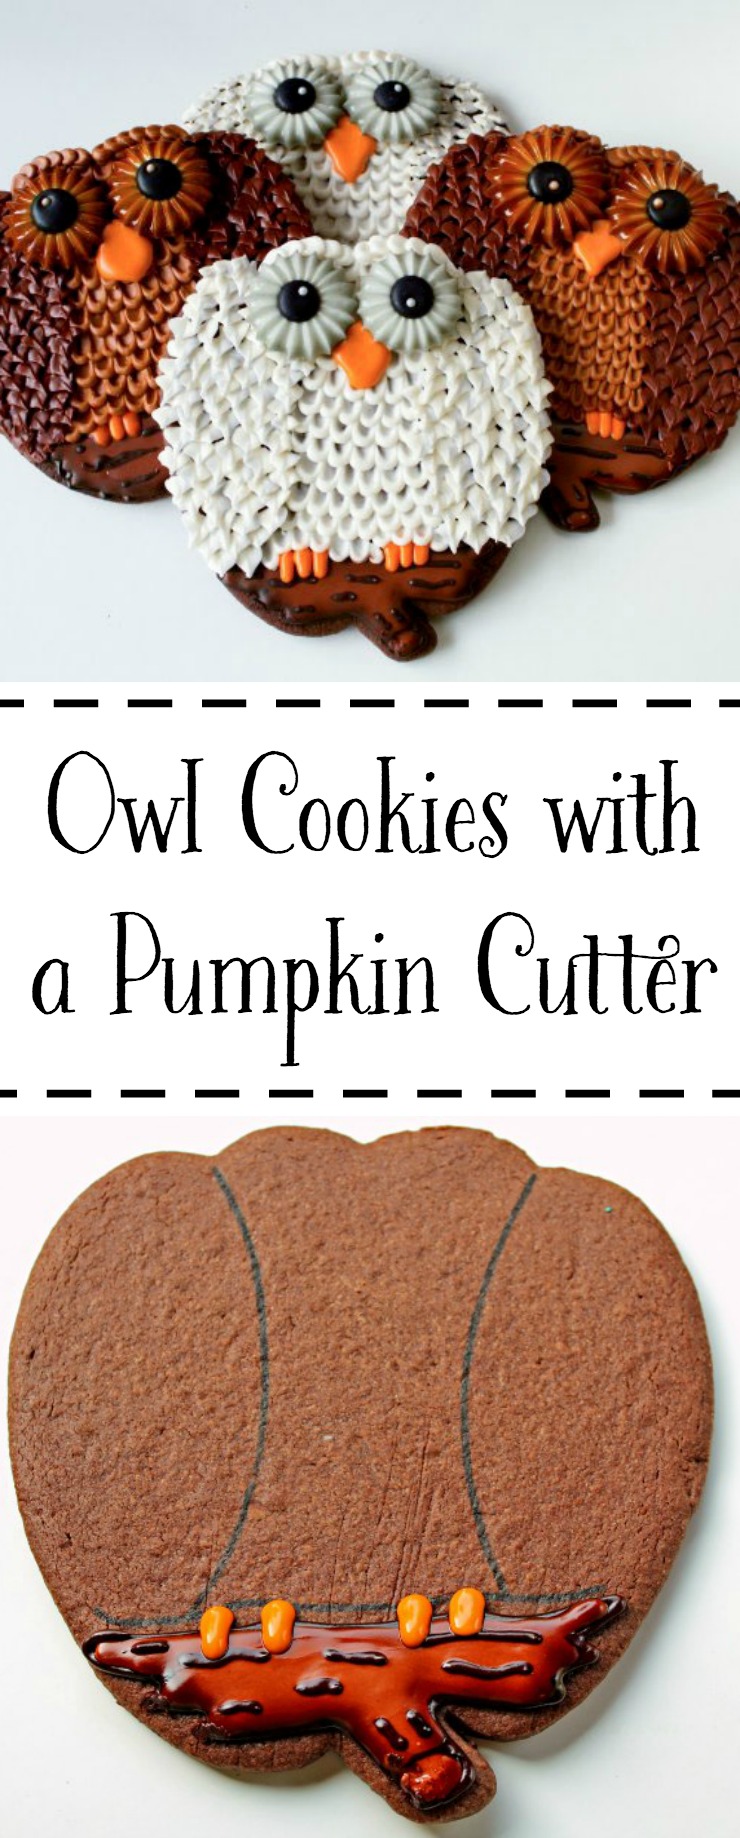 Make this Cute Owl Cookie by Using the Pumpkin Cookie Cutter | The Bearfoot Baker